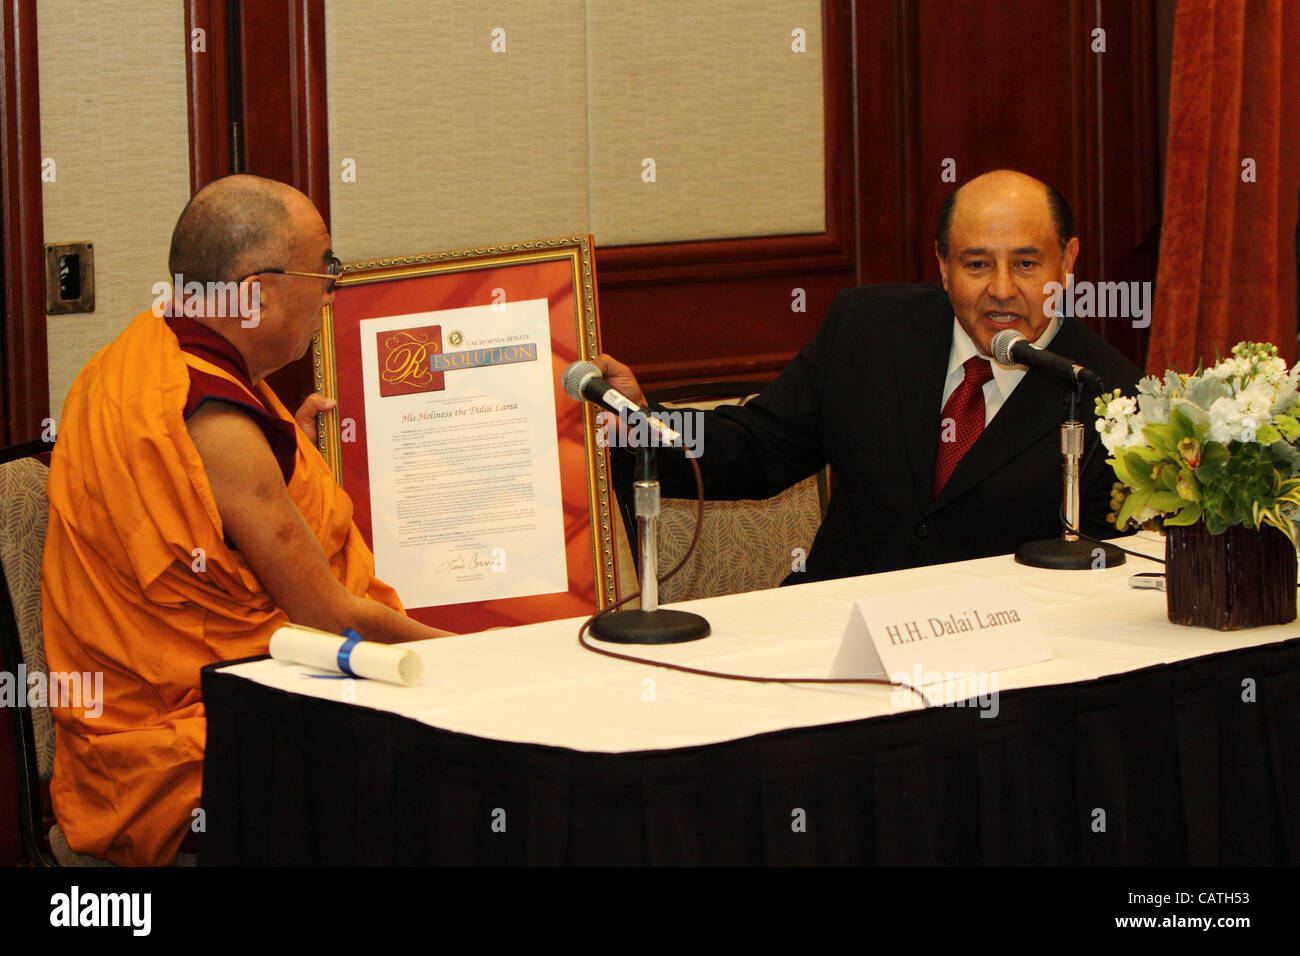 HH The XIV Dalai Lama receives a state resolution from California Senator Lou Correa, thanking the Dalai Lama for his 'lifelong efforts to world peace and improving the human conditions of the international community,' at the Westin Hotel in Long Beach, CA on Friday, Apri 20th 2012. During the press Stock Photo